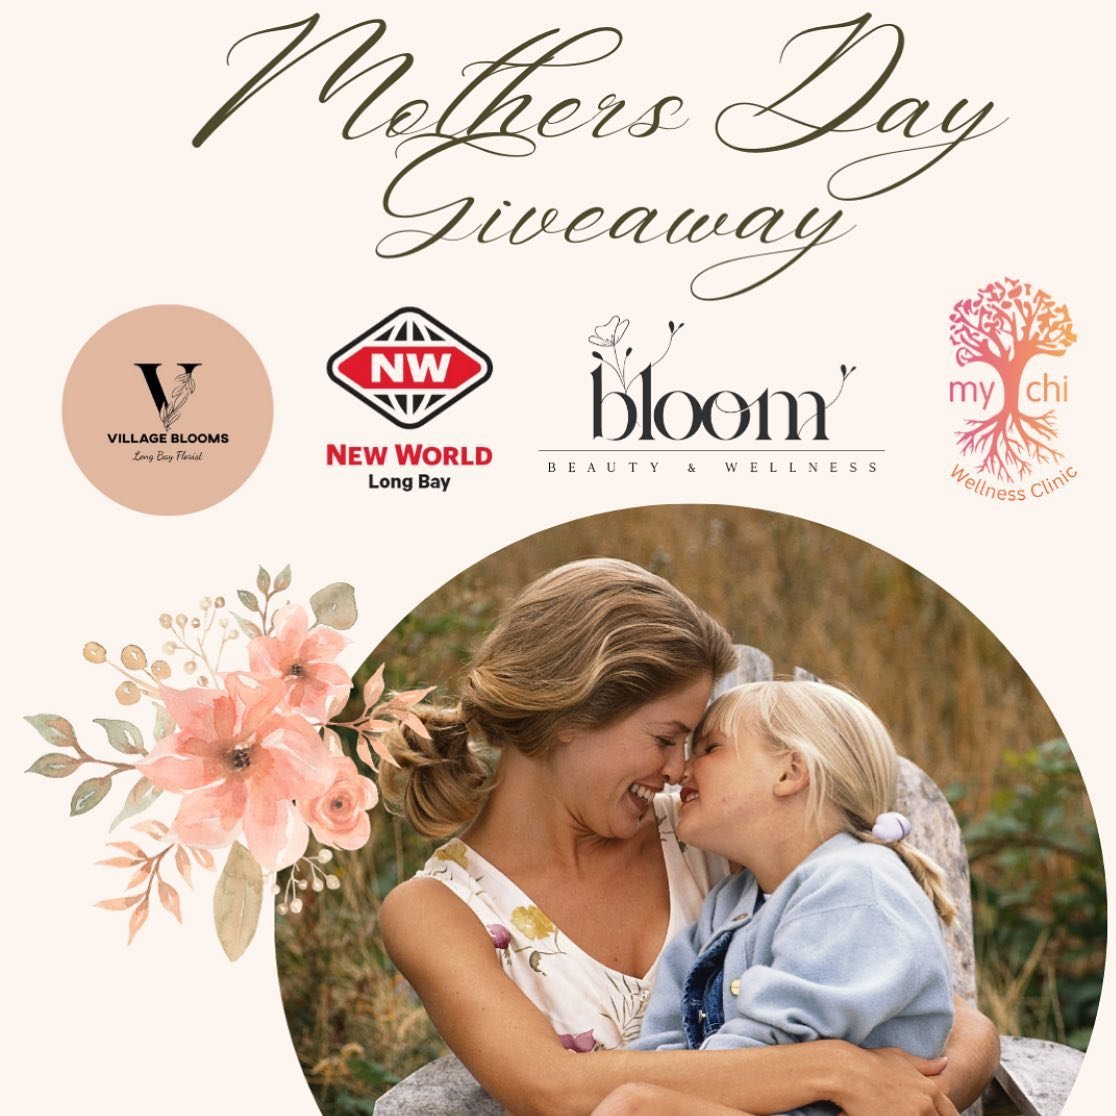 Don&rsquo;t miss out on our amazing Mother&rsquo;s Day giveaway! Make sure to enter for a chance to win something special for that important woman in your life! Head to @my_chi_mind_and_body to enter 💐💝 Good luck! #mothersday